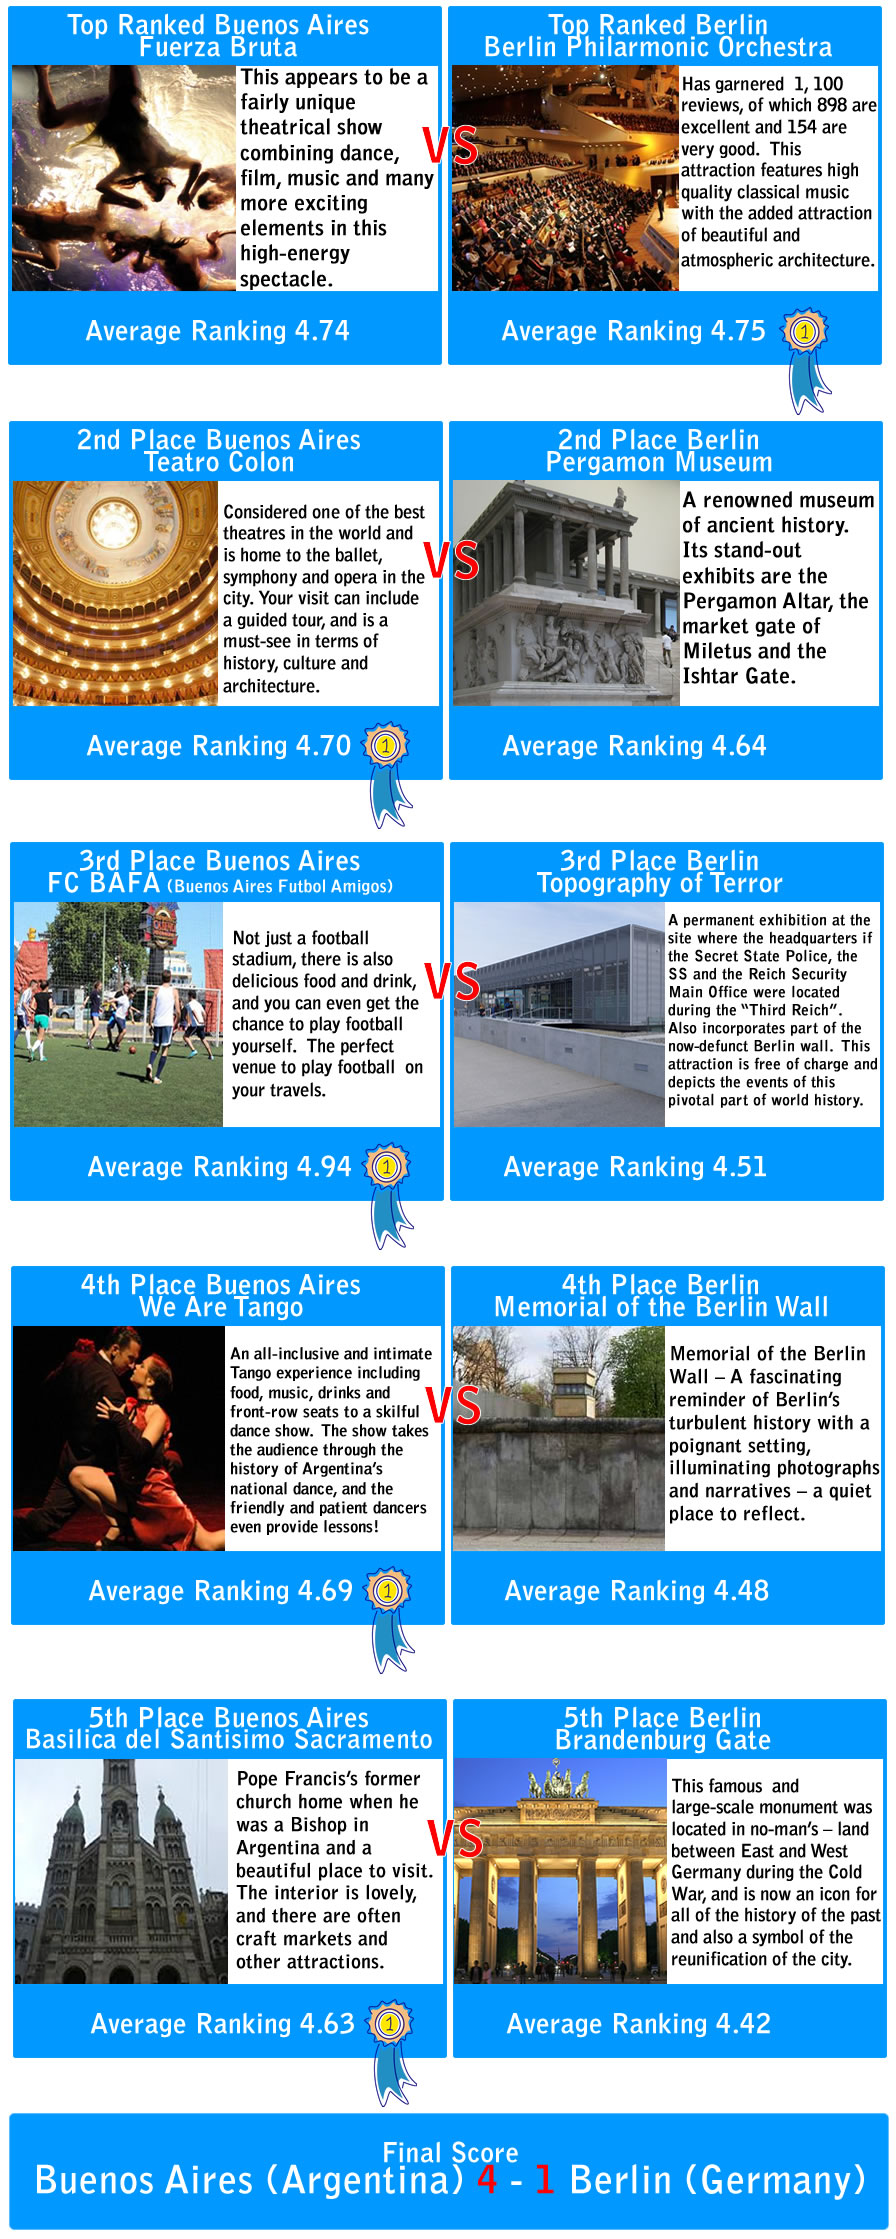 Buenos Aires vs Berlin Tourist Attractions